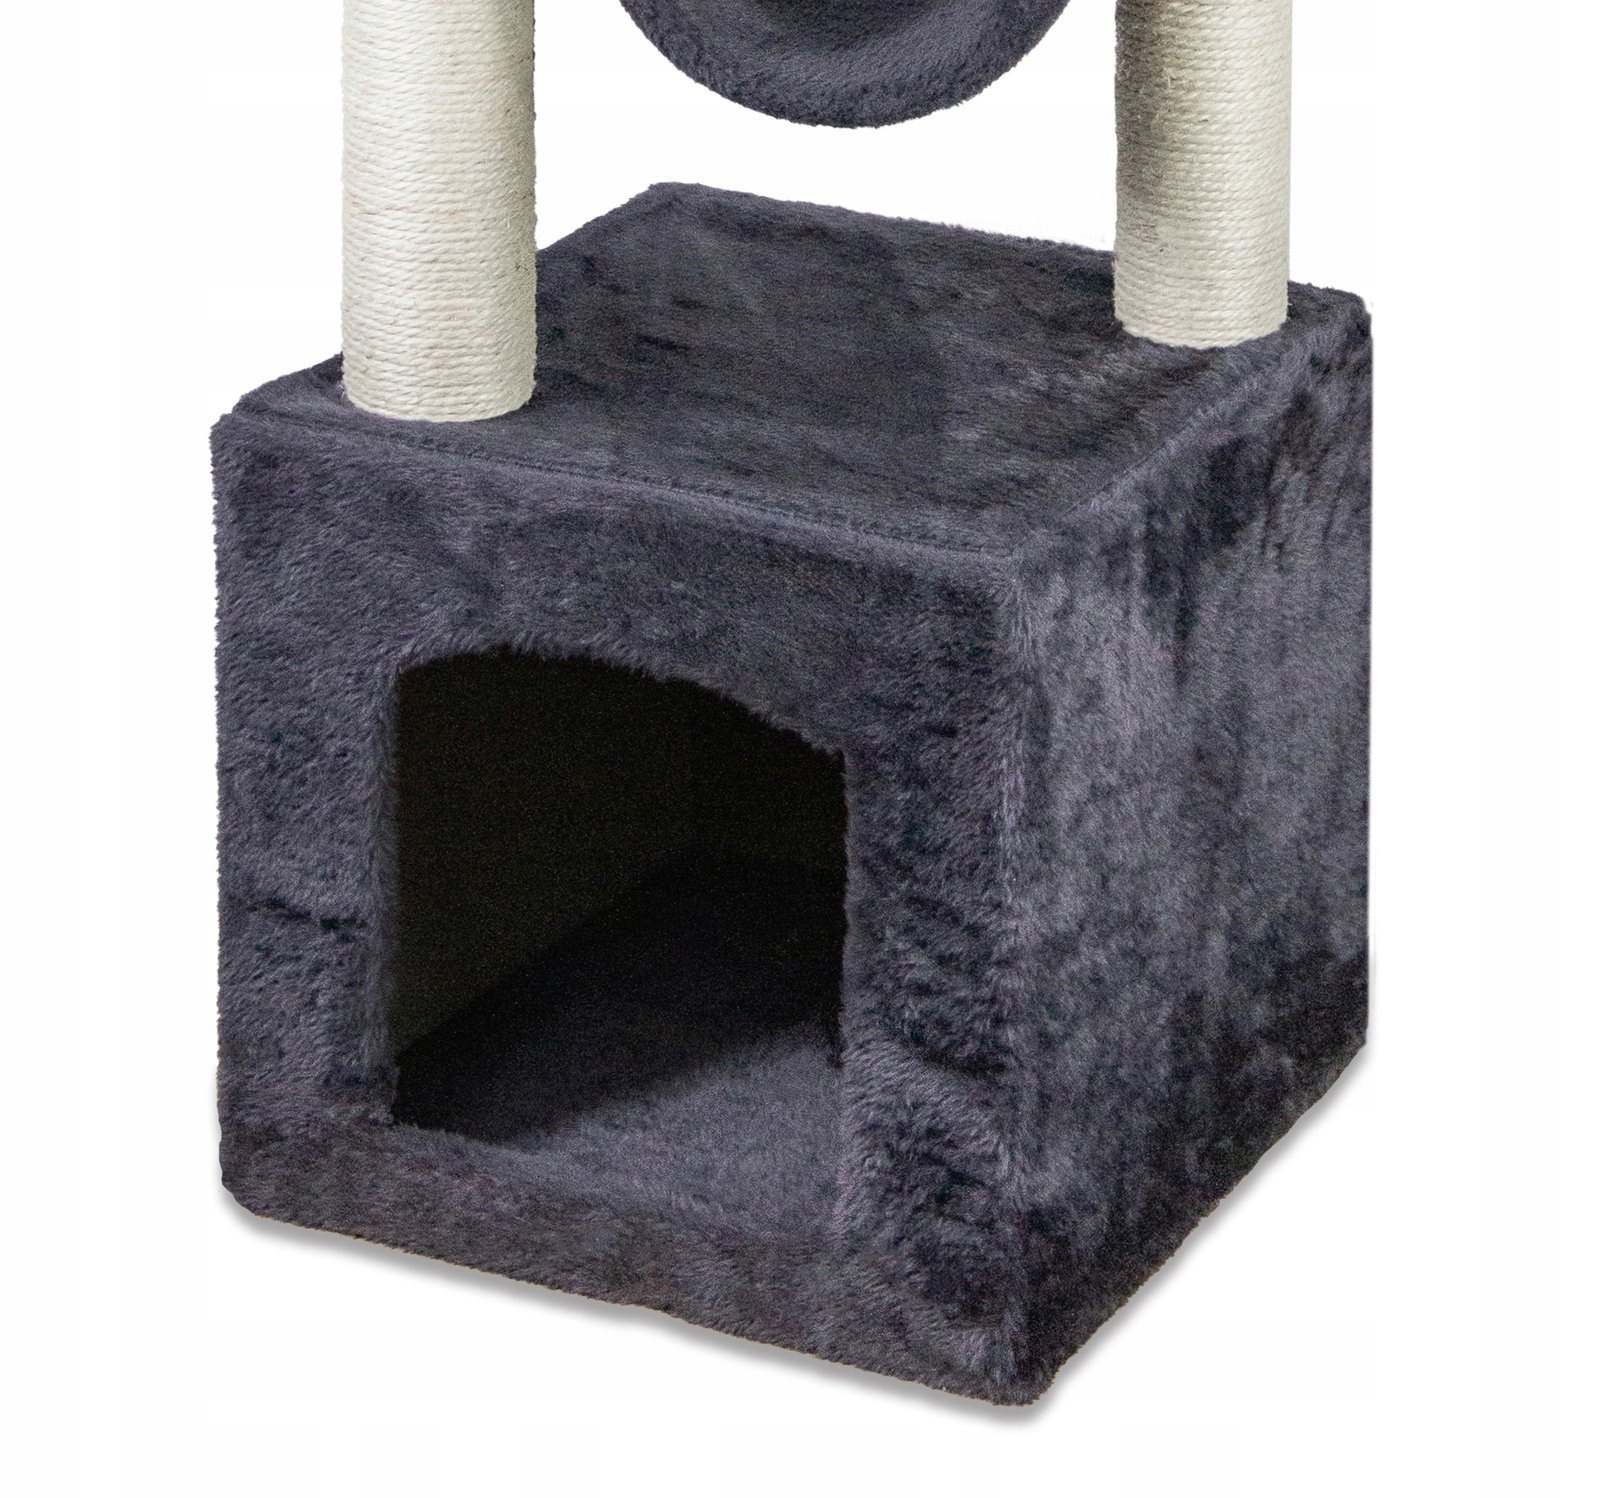 CAT SCRATCH TREE POST HOUSE TUNNEL TOY Серый